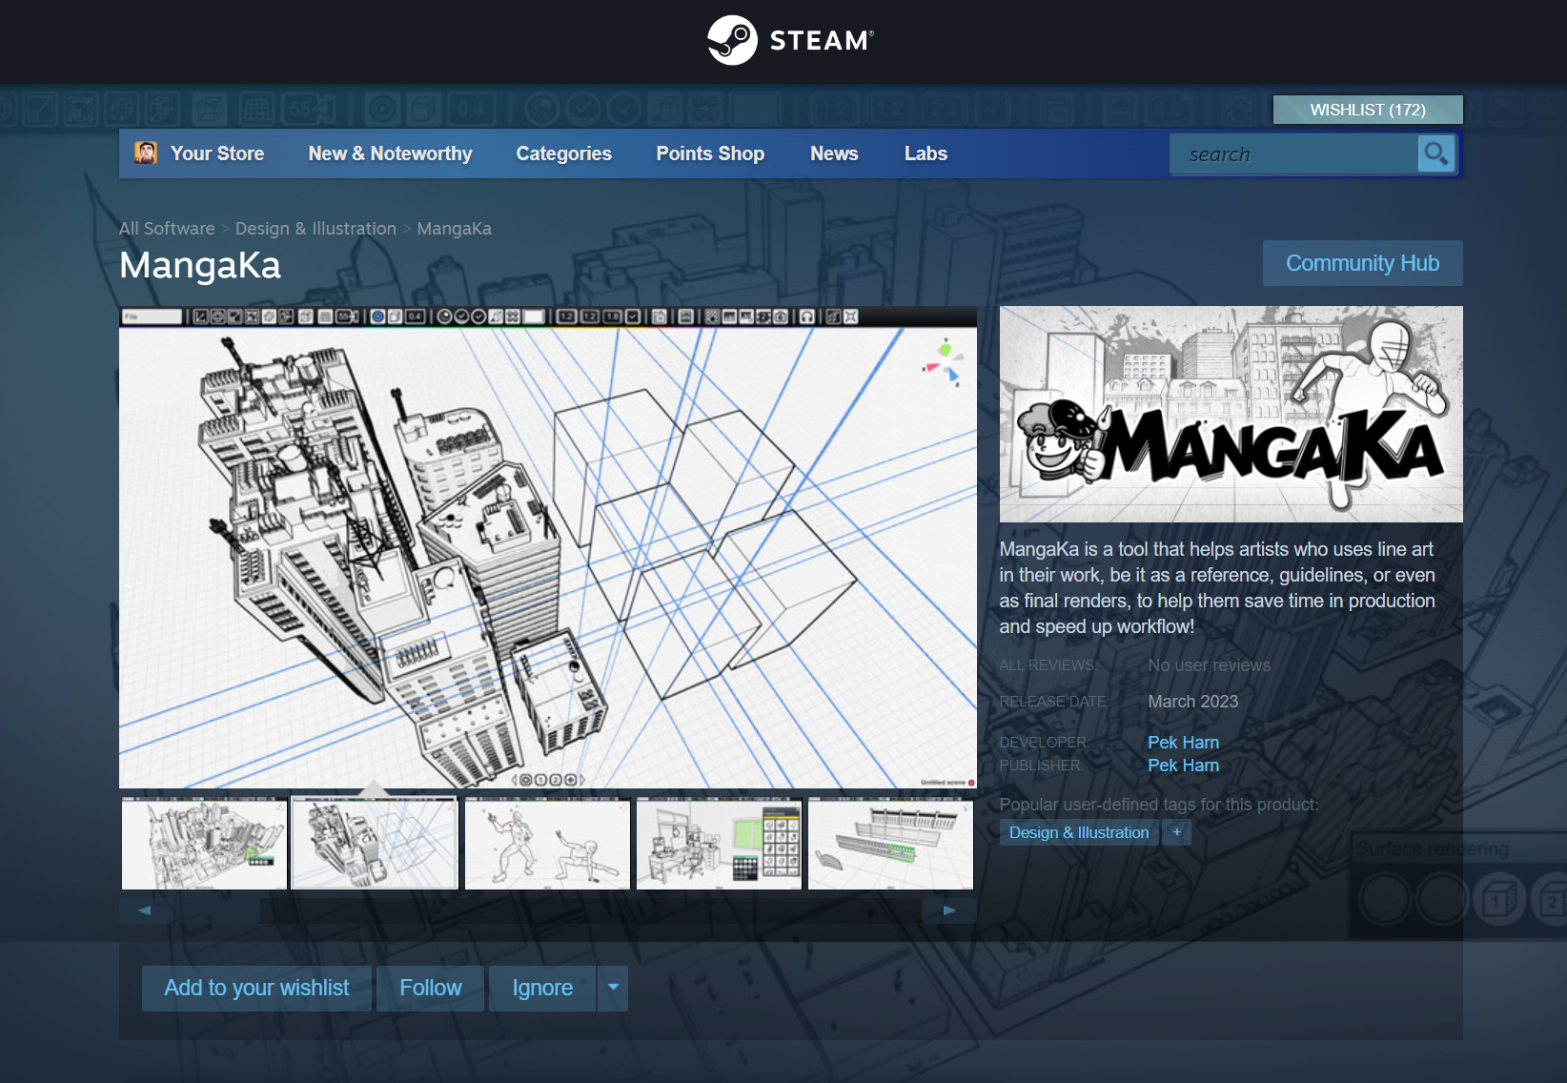 MangaKa’s Steam Page is UP!